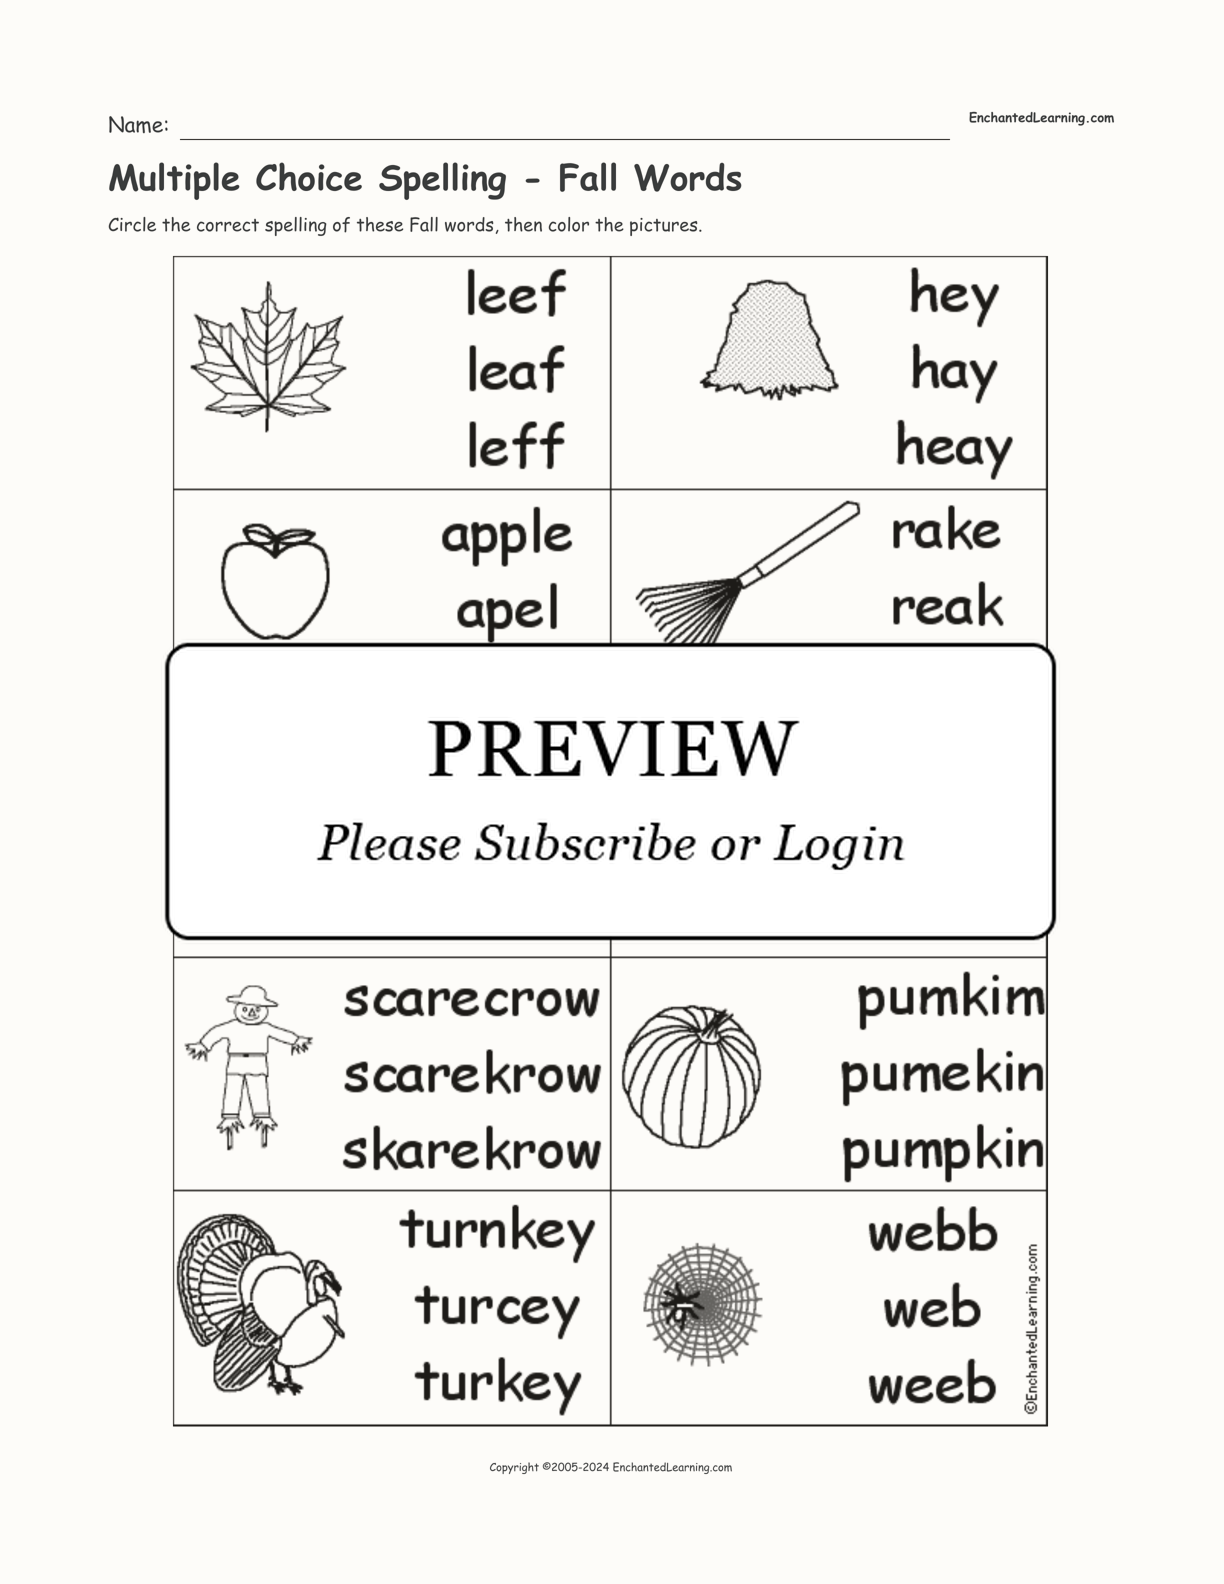 Multiple Choice Spelling - Fall Words interactive worksheet page 1